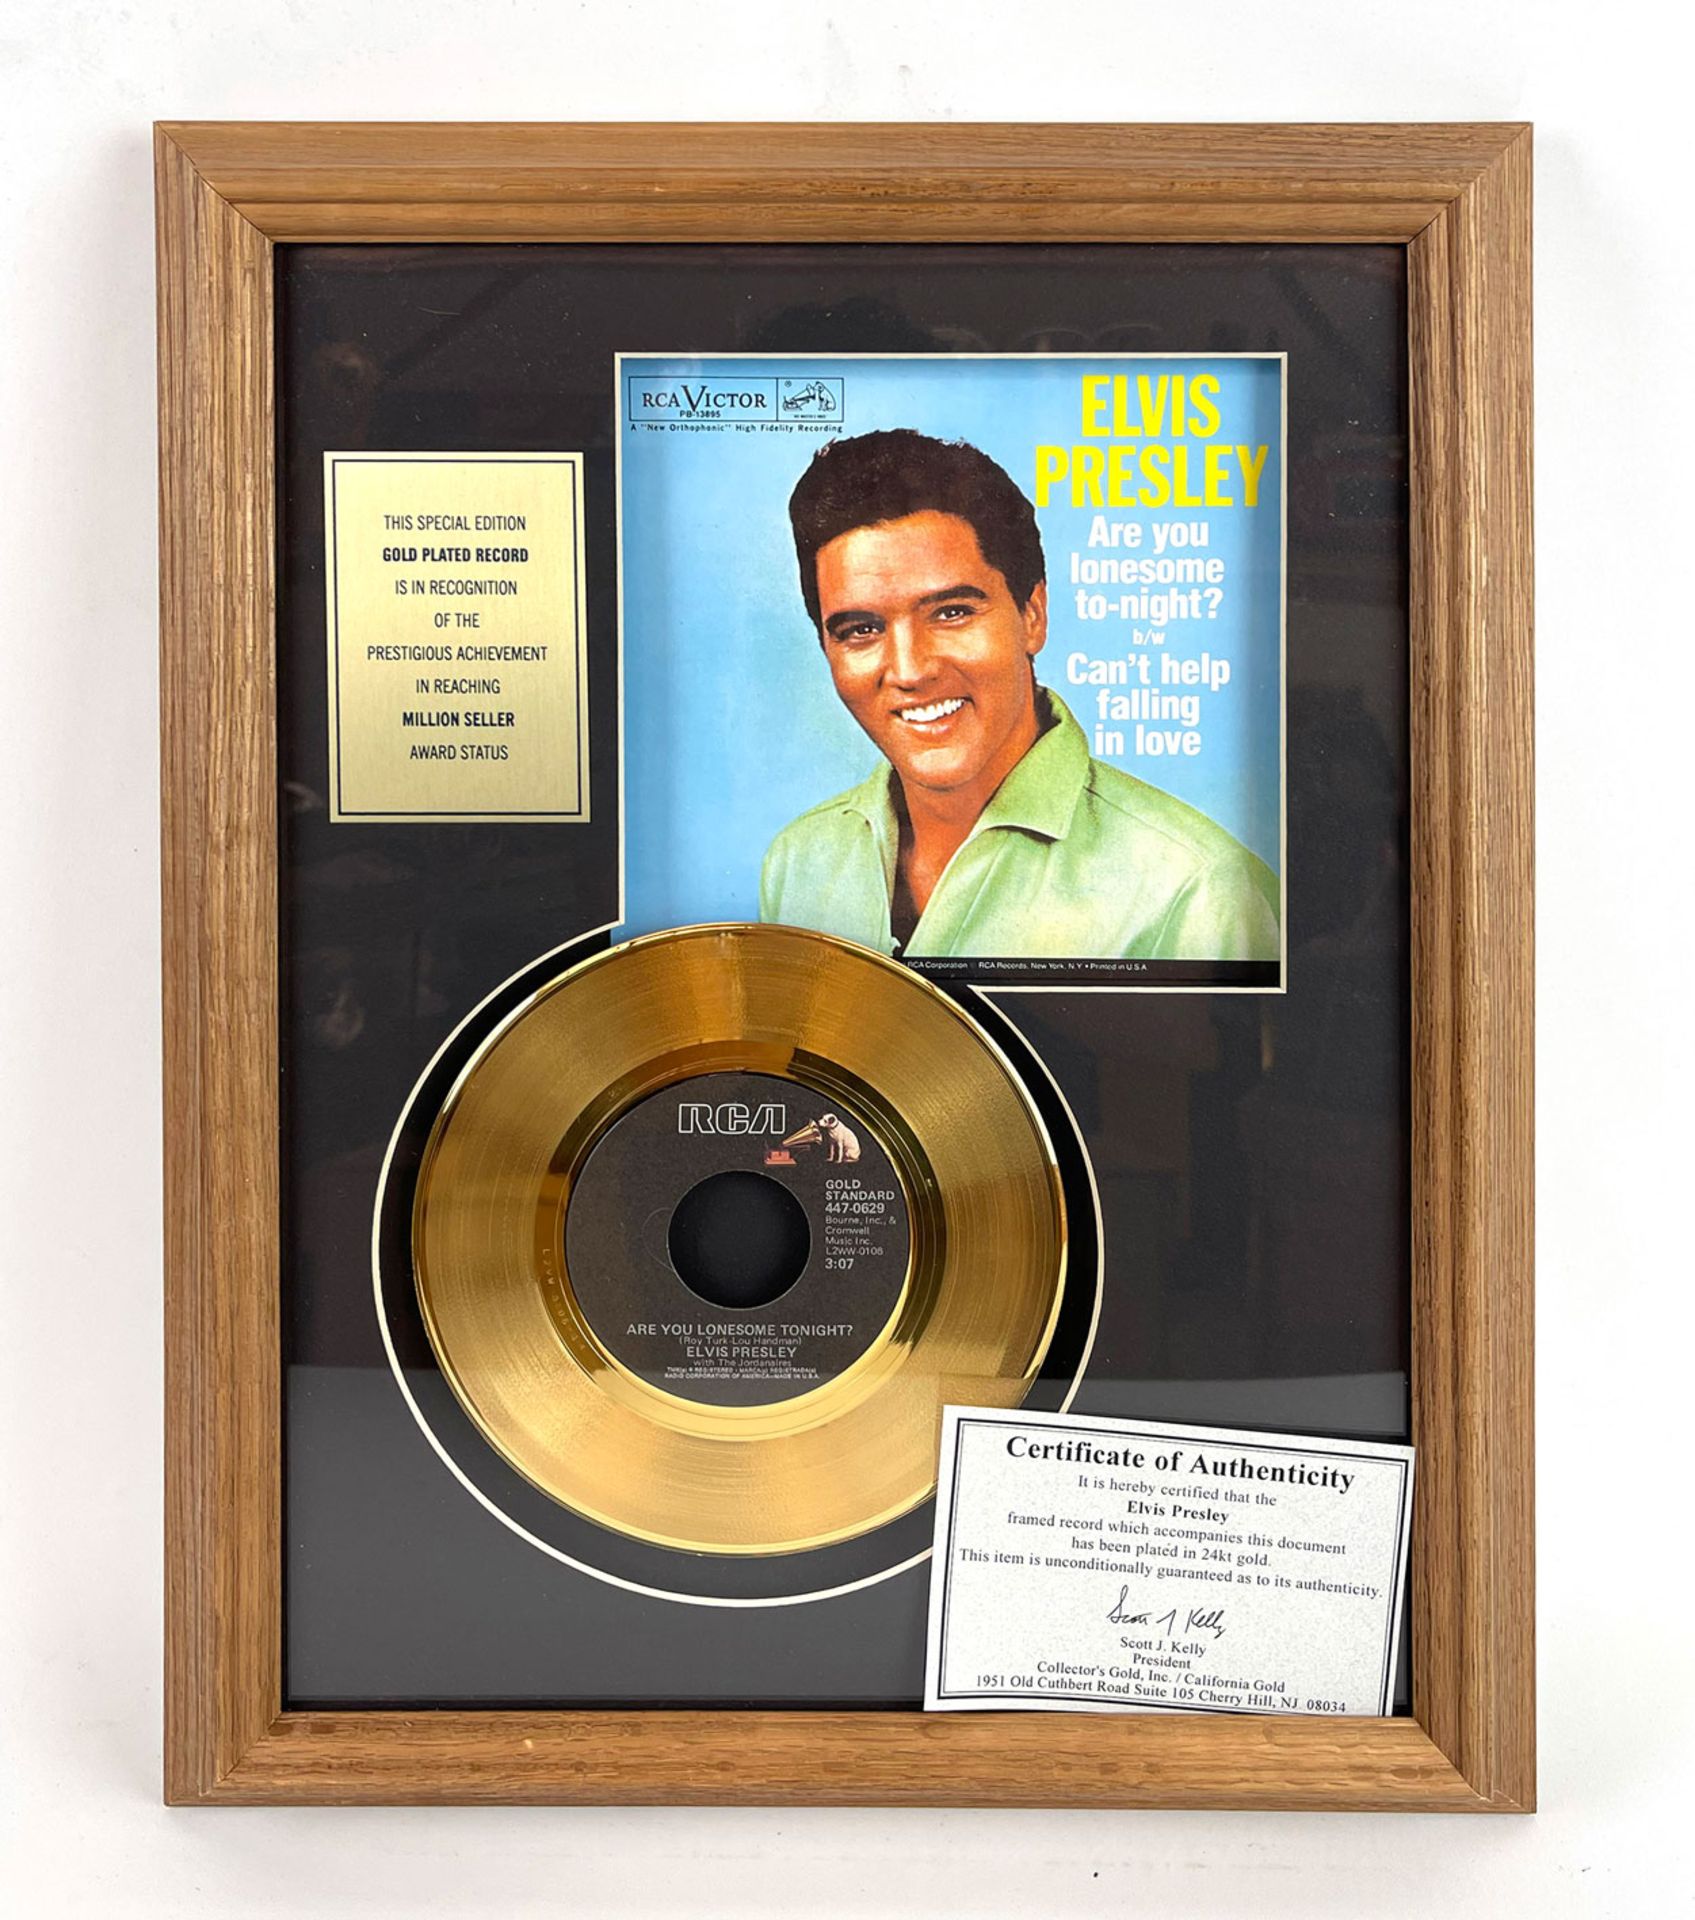 Elvis Presley Framed Golden Record "Are you lonesome tonight"